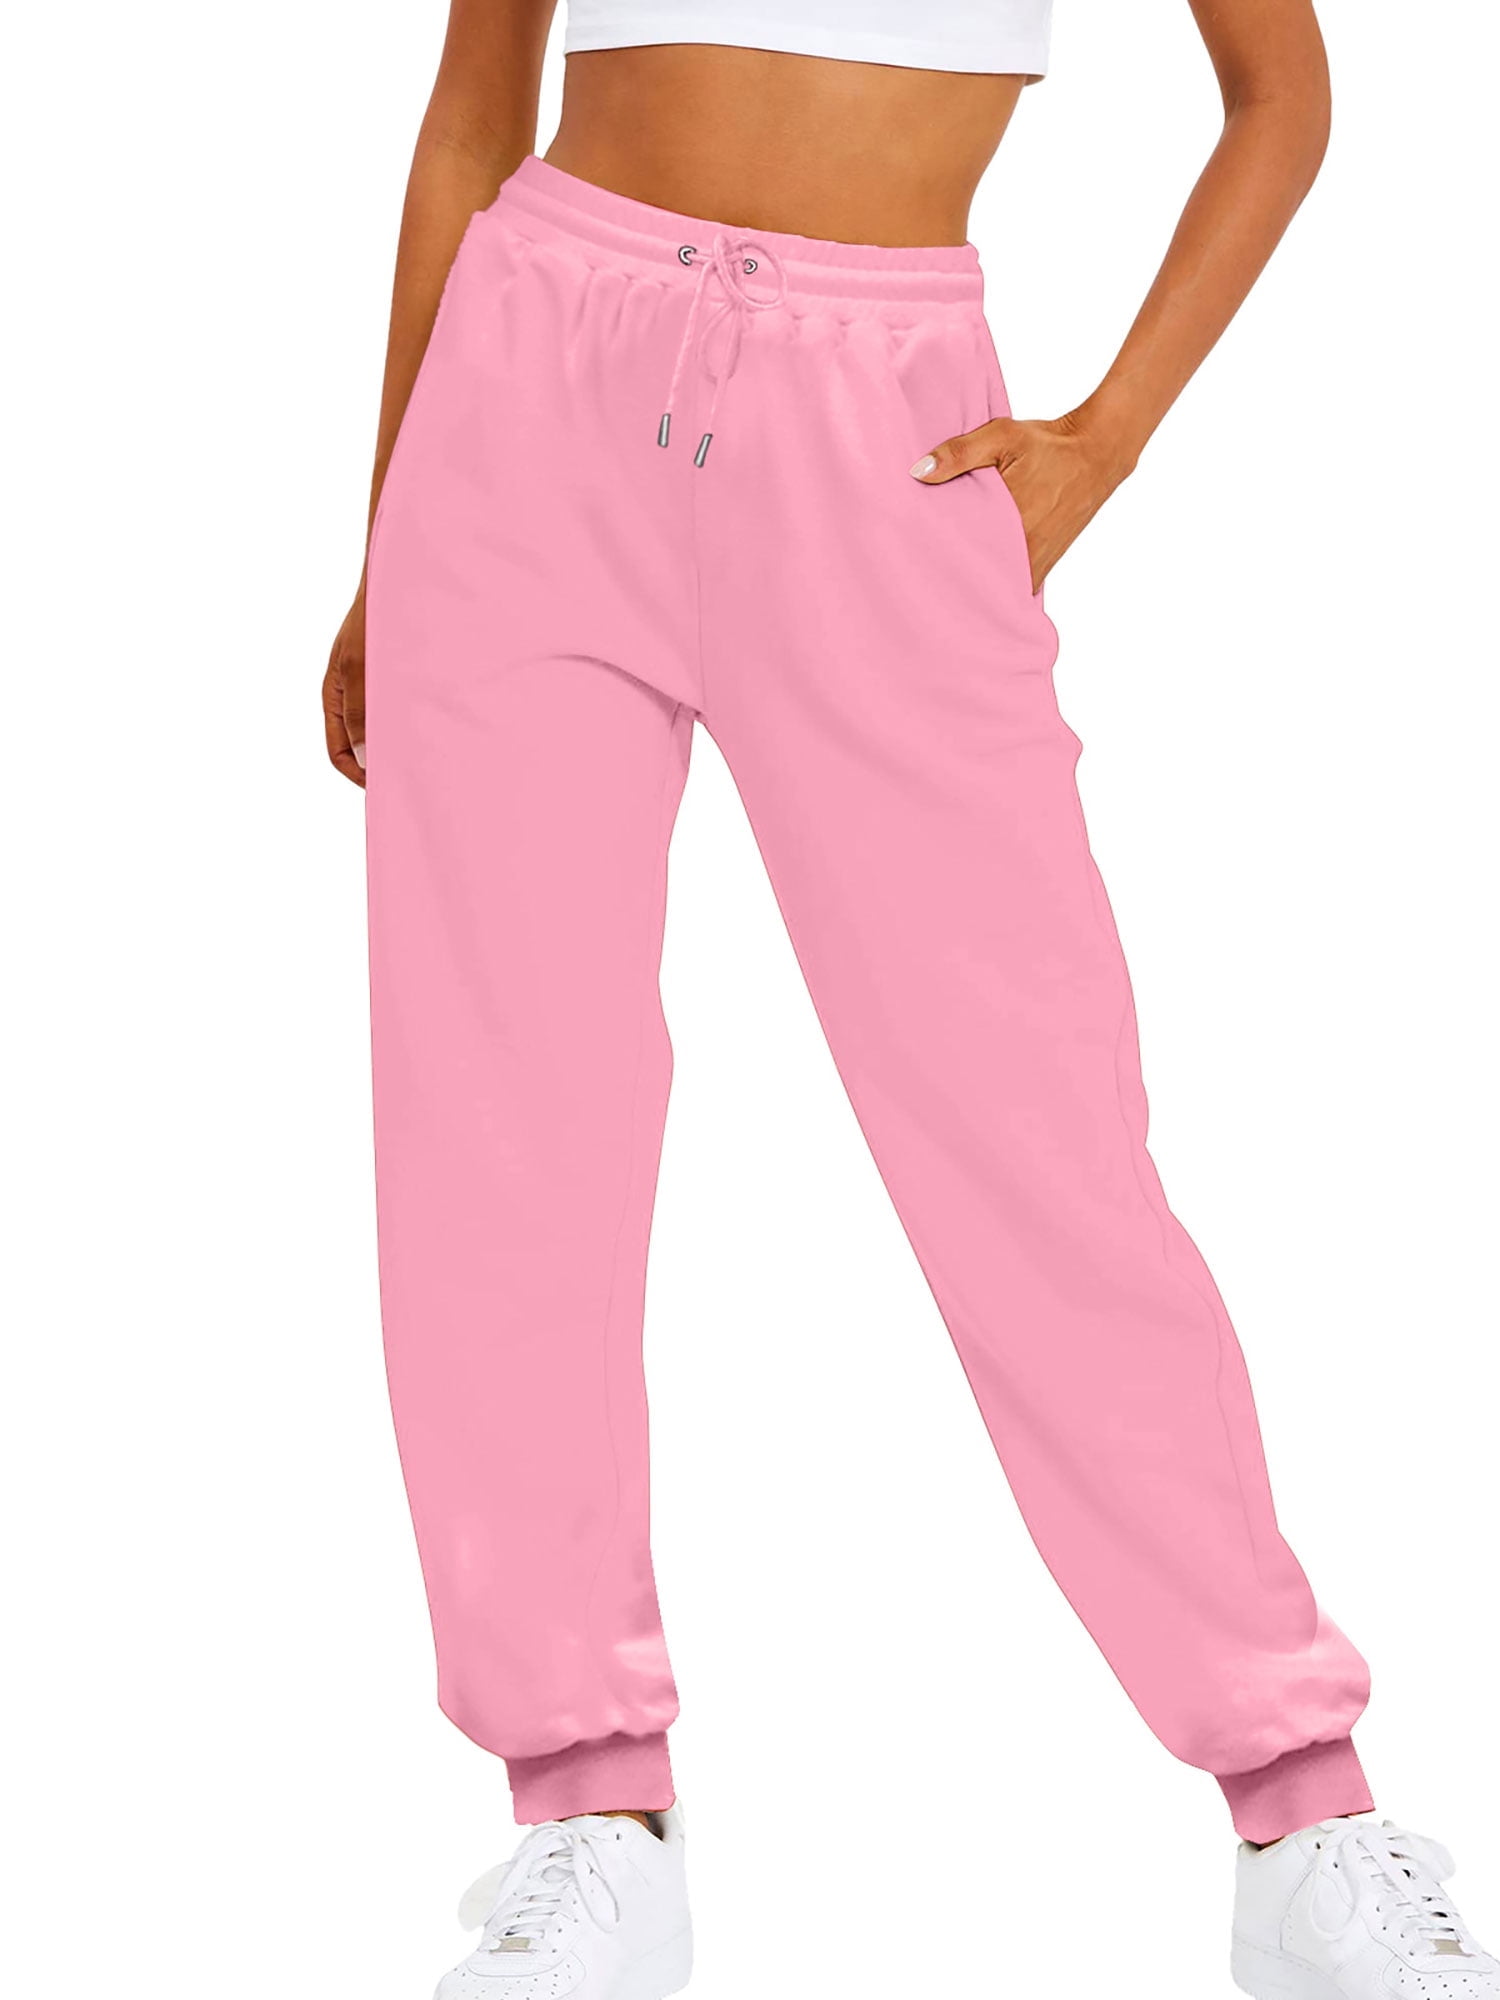 Cindysus Womens Cinch Bottom Sweatpants High Waisted Athletic Workout  Joggers Lounge Pants Activewear with Pockets Pink XL